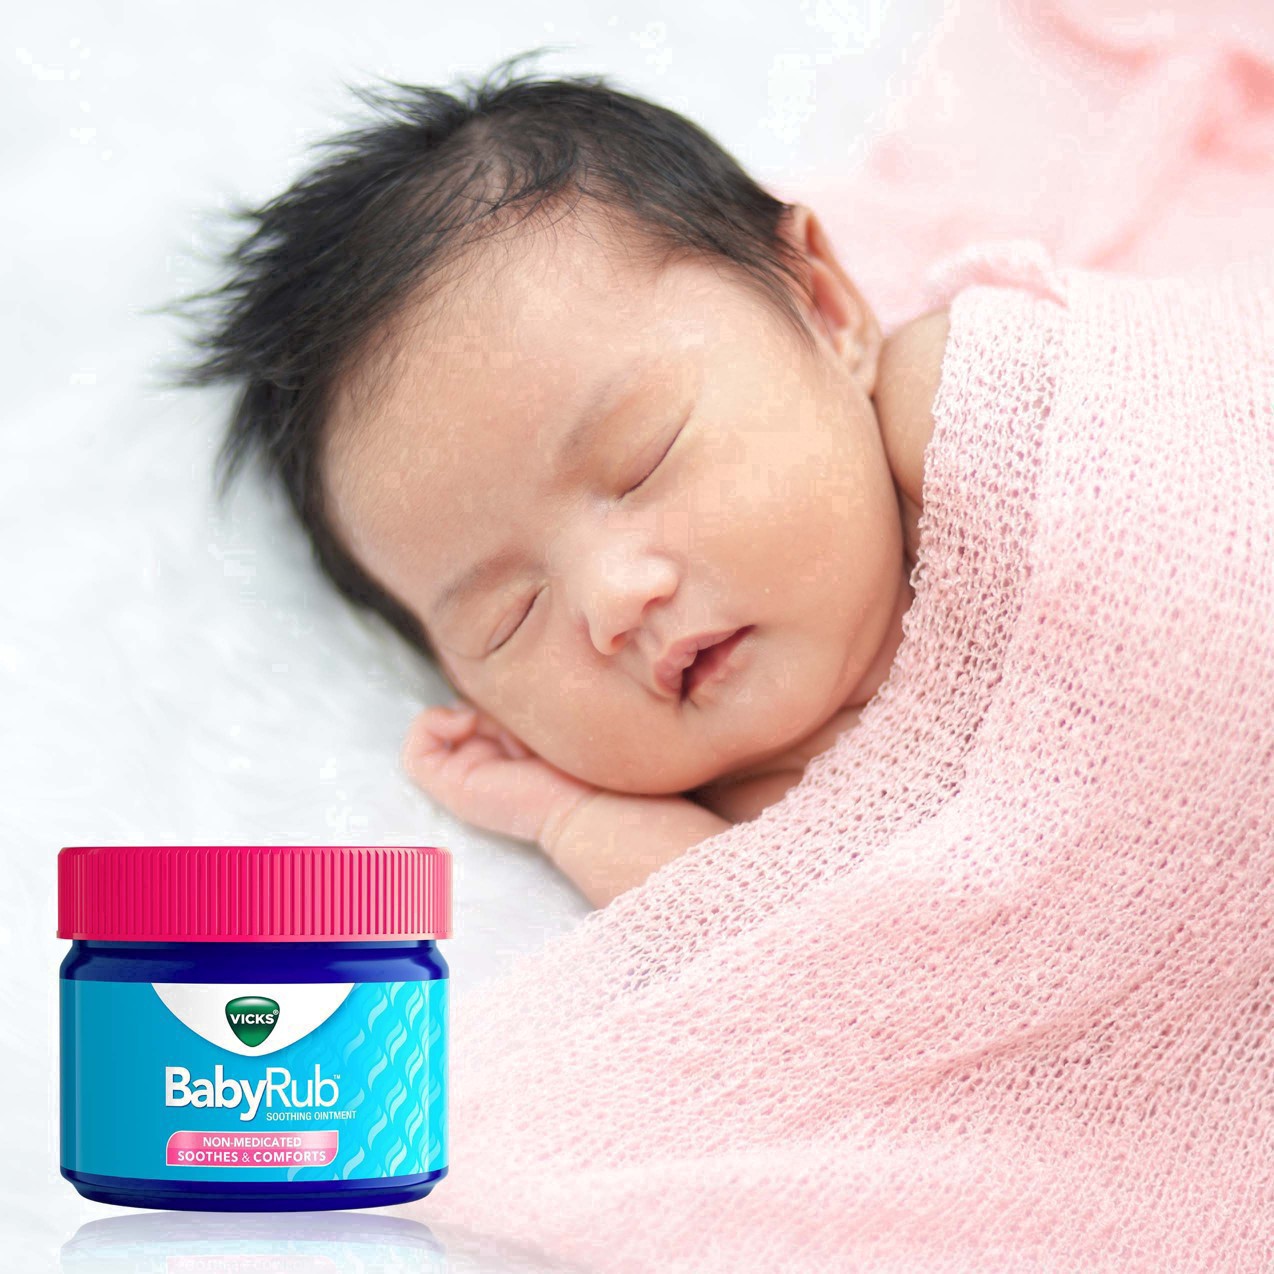 slide 30 of 78, Vicks BabyRub, Chest Rub Ointment with Soothing Aloe, Eucalyptus, Lavender, and Rosemary, from The Makers of VapoRub, 1.76 oz, 1.76 oz